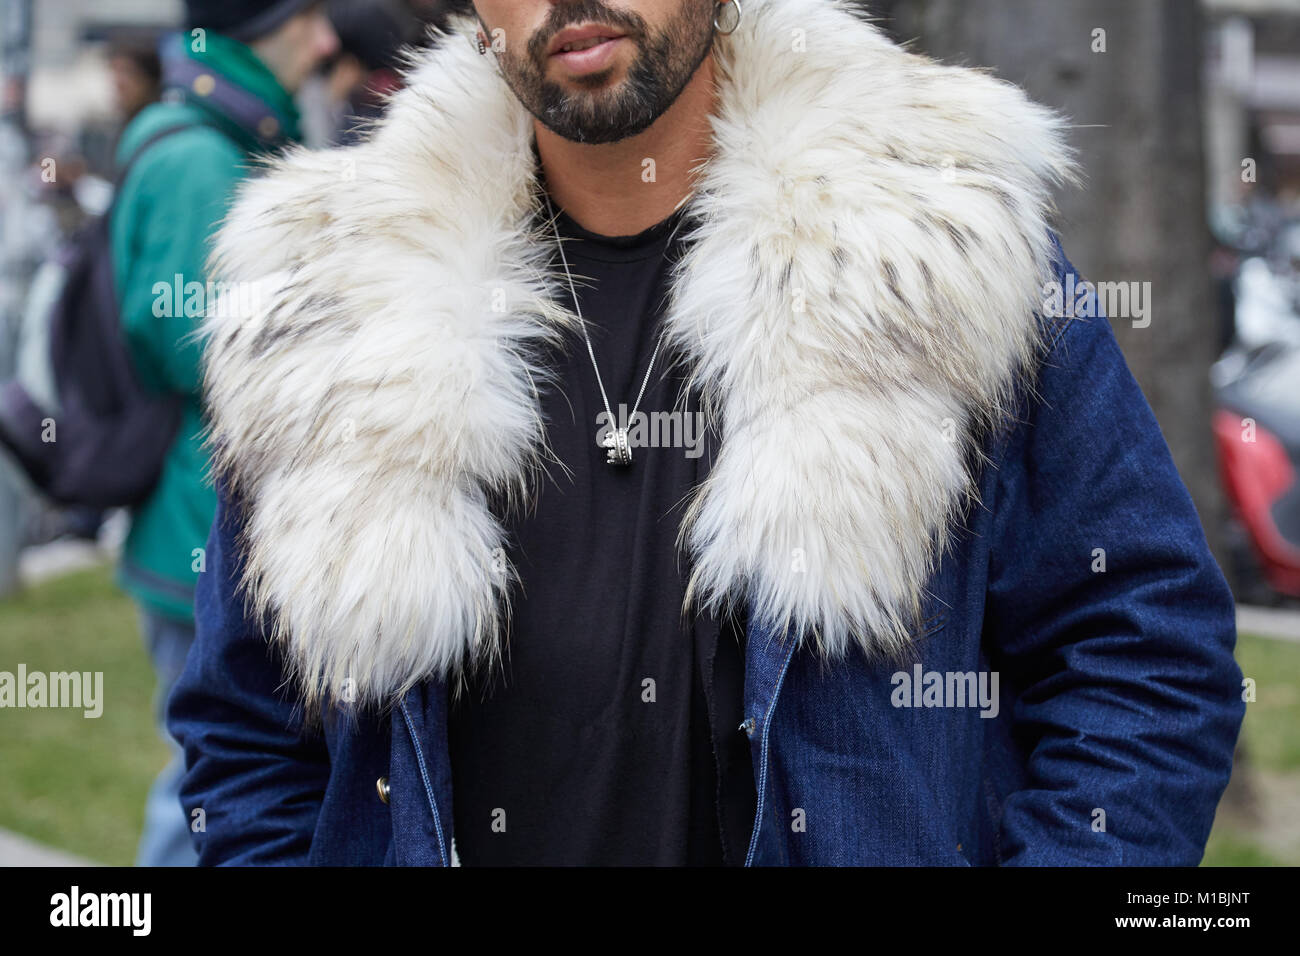 MILAN - JANUARY 15: Man with blue jeans jacket and white fur collar ...